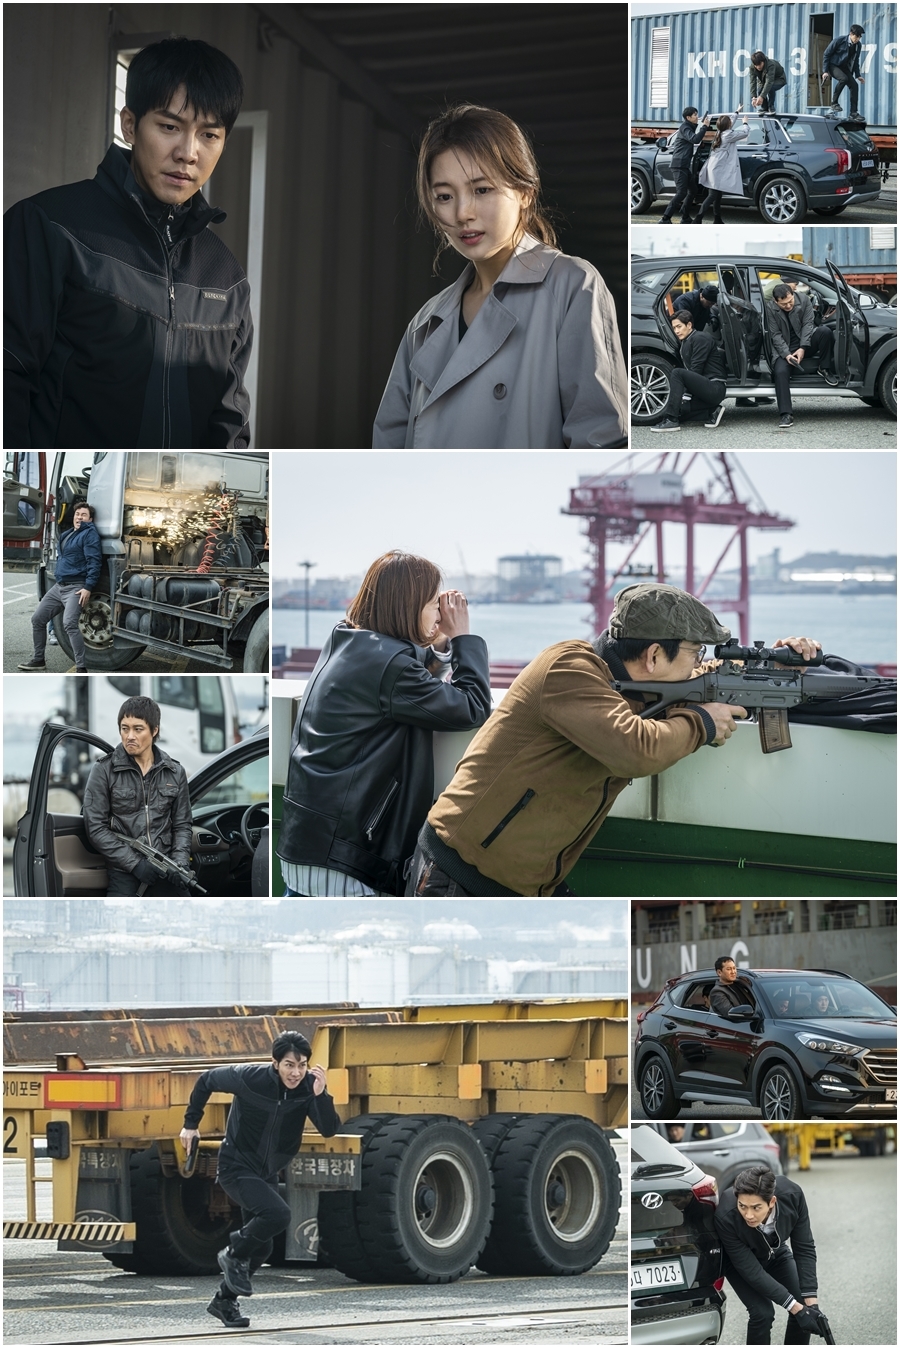 NIS Yone, this time its on the Incheon dock!Vagabond Lee Seung-gi and Bae Suzy, and Shin Sung-rok - Lee Ki-young - Hwang Bo Ra - Shin Seung-Hwan, etc., are reunited and create a group action called Anader Klath.SBS gilt drama Vagabond (VAGABOND) (playwright Jang Young-chul, director Yoo In-sik / production Celltrion Healthcare Entertainment CEO Park Jae-sam) is an intelligence action melody that uncovers a huge national corruption hidden in the concealed truth of a man involved in the crash of a private passenger plane.After Cha Dal-gun and Gohari went to Morocco to capture Kim Song Yuqi (Jang Hyuk-jin), they confront the enemys indiscriminate attacks and offer thrilling tension and exciting catharsis with the development of a speedy story that succeeded to smuggle.In this regard, the group of enemies such as Lee Seung-gi, Bae Suzy, NIS One, Jung Man-sik, and Choi Dae-chul were caught in the group action in the Incheon Buga.In the drama, there is a scene where the indiscriminate attack of Jung Man-sik, who discovered that Cha Dal-gun and Gohari arrived in Korea, is being carried out.Cha Dal-geon and Go Hae-ri stand in a container box on a trailer with a tense expression and jump to the floor with Gi Tae-woong (Shin Sung-rok) and Kim Song Yuqi.In addition, Kang Joo-chul (Lee Ki-young), who had been shocked by the sudden death of an acute heart attack on the last broadcast, has been reappearing and attracts attention.Kang Ju-cheol watches the bullets in the sniper gun, and next to it, Hwang Bo Ra is calling coordinates by looking at the four sides.In addition, Min Jae-sik expresses his anger by taking half of his body out of a car that runs with a poisonous expression and shooting like crazy, and Min Jae-siks right-hand man, Kim Min-seo, is also on the offensive posture by lowering his body.In addition, Kim Do-soo is raising tension by launching ruthless shooting without shaking with his unique expressionless expression.In the last broadcast, Cha Dal-gun and Gohari, with the help of Edward Park (Lee Kyung-young), carried Kim Song Yuqi into a cargo ship bound for Korea and conducted a disturbing operation against NIS to show up at airports and ports around the world.How three people were able to step on the Korean land through a rough journey, and how the Min Jae-sik party came to the scene and poured ruthless attacks.Above all, Lee Seung-gi and Bae Suzy, and Shin Sung-rok - Lee Ki-young - Hwang Bo Ra - Shin Seung-Hwan, etc., filmed the group action scene, and the day was so hot that snow was too hard to open.Actors, unconcerned by the undead weather, showed enthusiasm to repeat dozens of rehearsals to open and close the heavy iron doors of the super-sized container box on the trailer and to digest the difficult scenes of jumping to the floor.After the rest of the day, they took a commemorative shot in commemoration of their gathering together for a long time, and they gave a cheerful atmosphere by laughing at each others faces taken in the photographs.Jung Man-sik, Choi Dae-chul and Kim Min-seo, who arrived in the late stage, also relaxed and relaxed.Jung Man-sik, Choi Dae-chul and others rehearsed several times to finish the difficult scene of taking their body out of the running car and sniping their opponents in Hankyu, but the youngest Kim Min-seo showed a smileless struggle even when the gloves that were wearing the rough cement floor were torn several times.iMBC  Photos